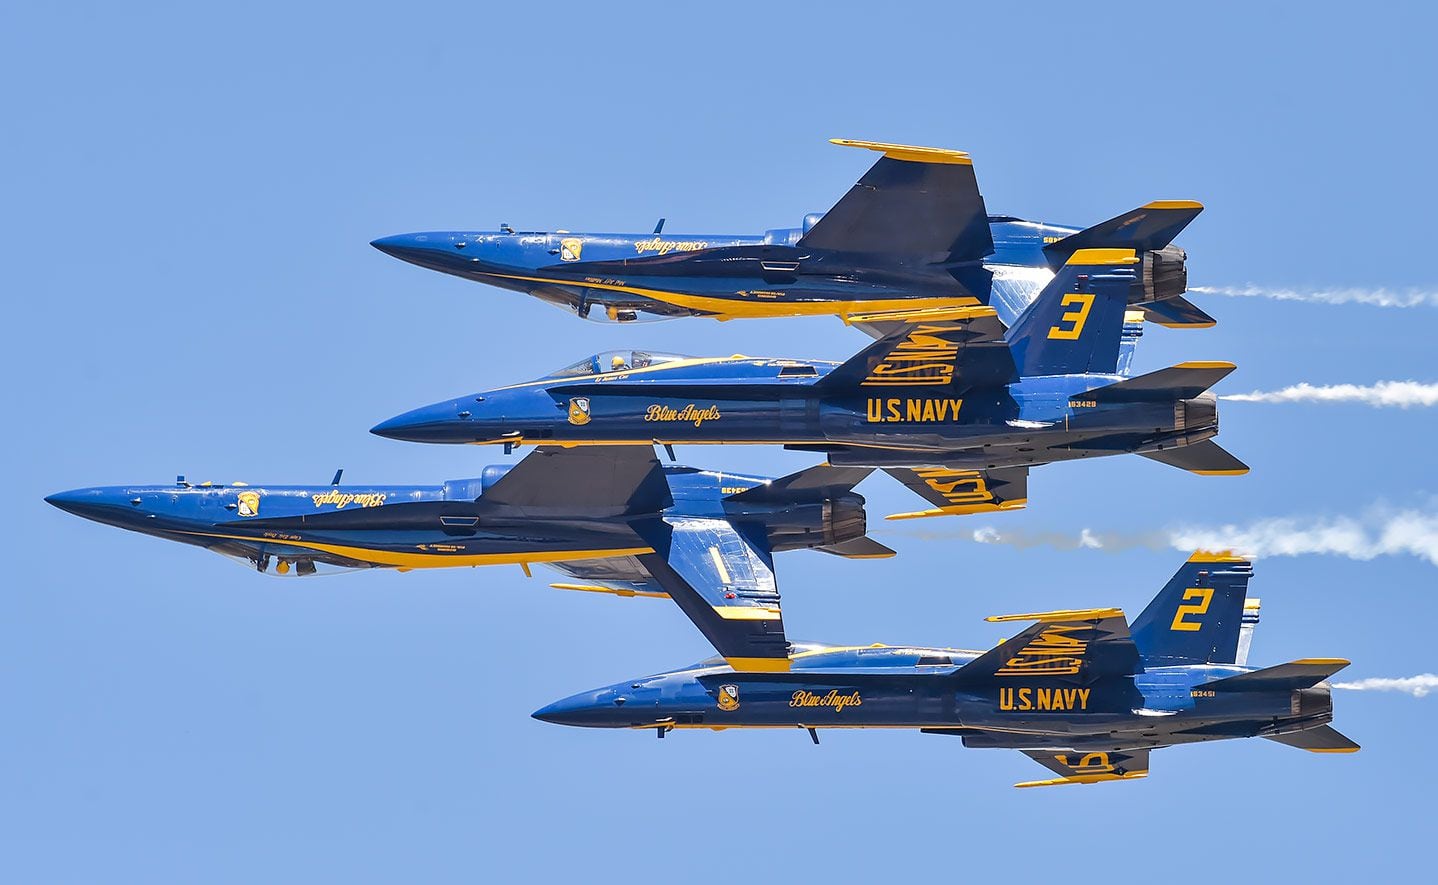 Blue Angels' Classic F/A-18 Hornets Take Final Flights After 34 Years